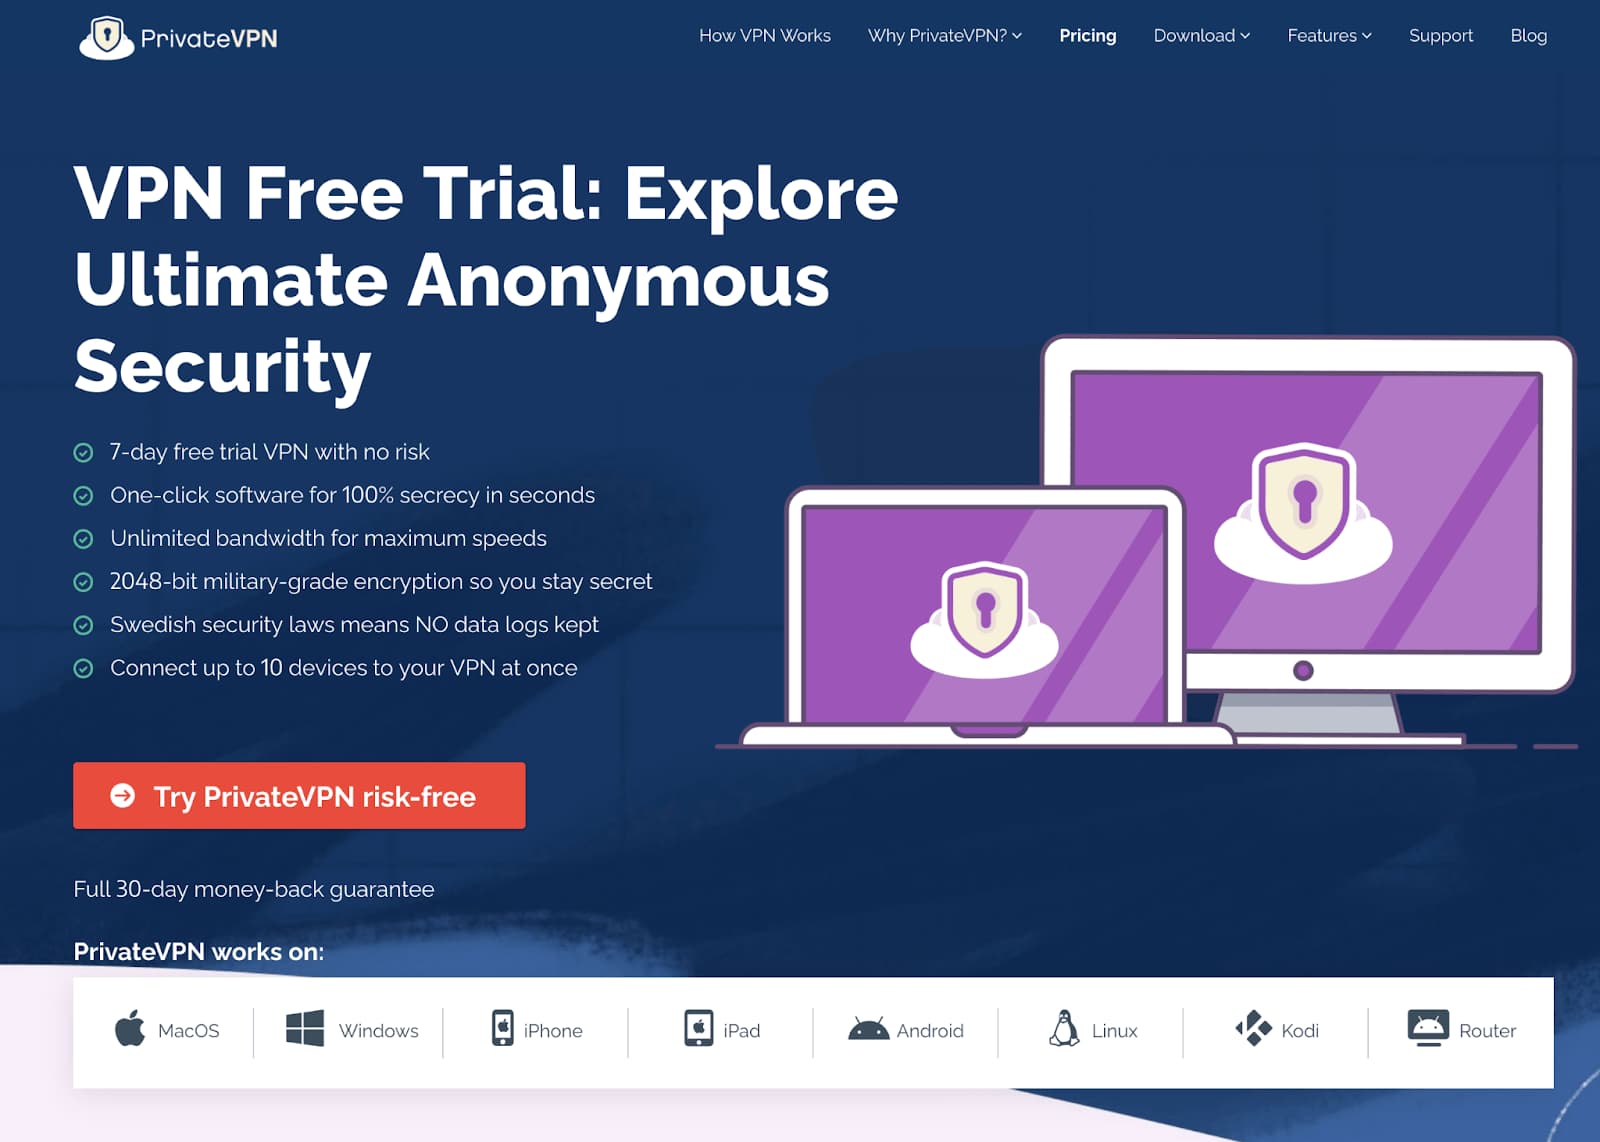 PrivateVPN's free trial page